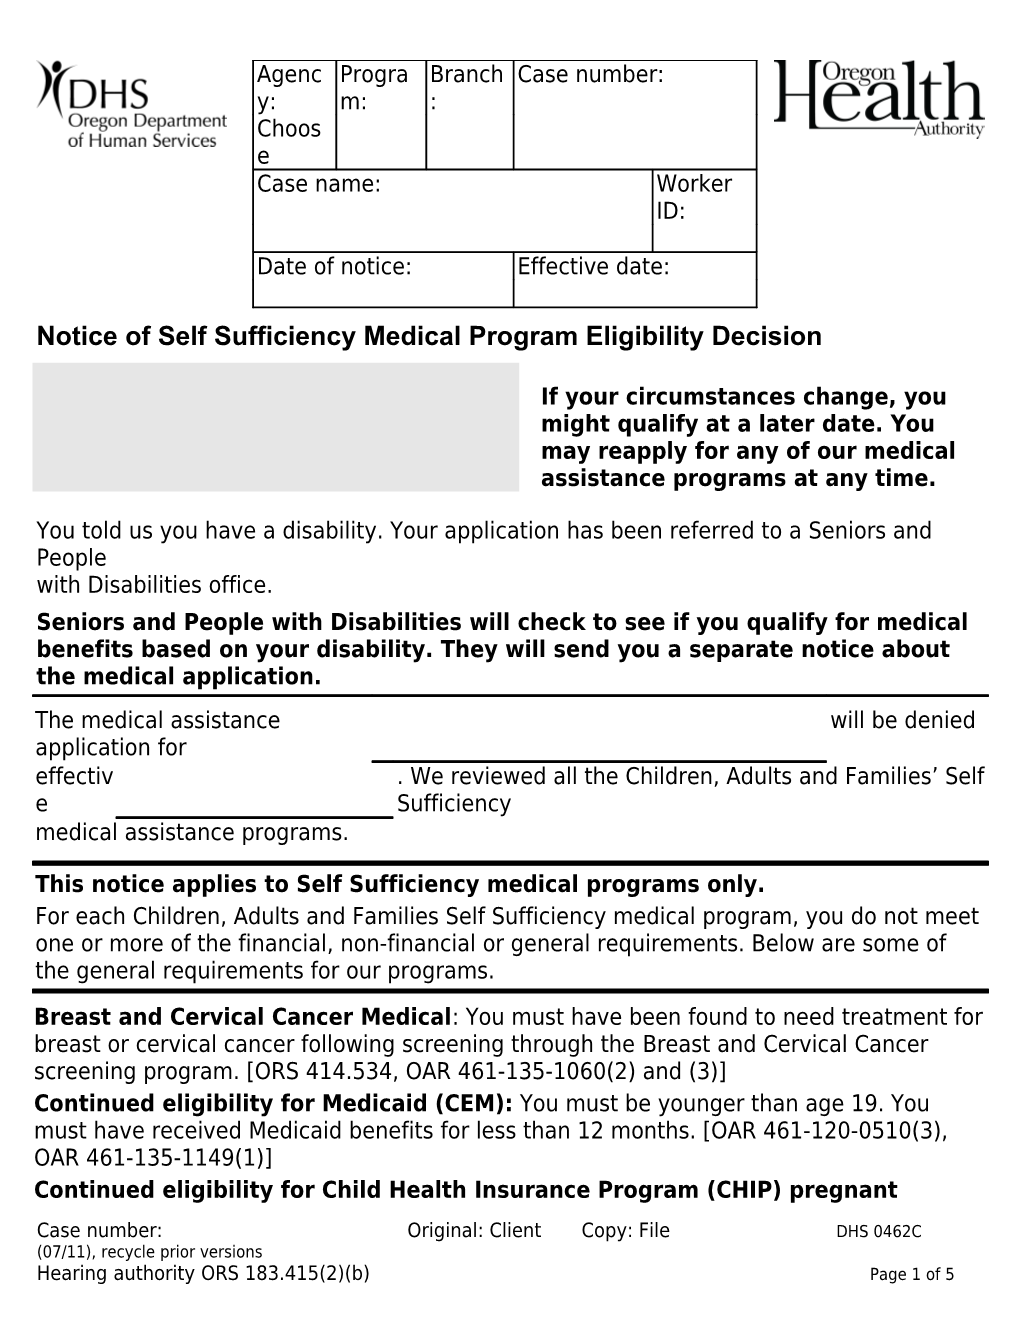 Medical Assistance Denial Notice DHS 0462A (5/06)